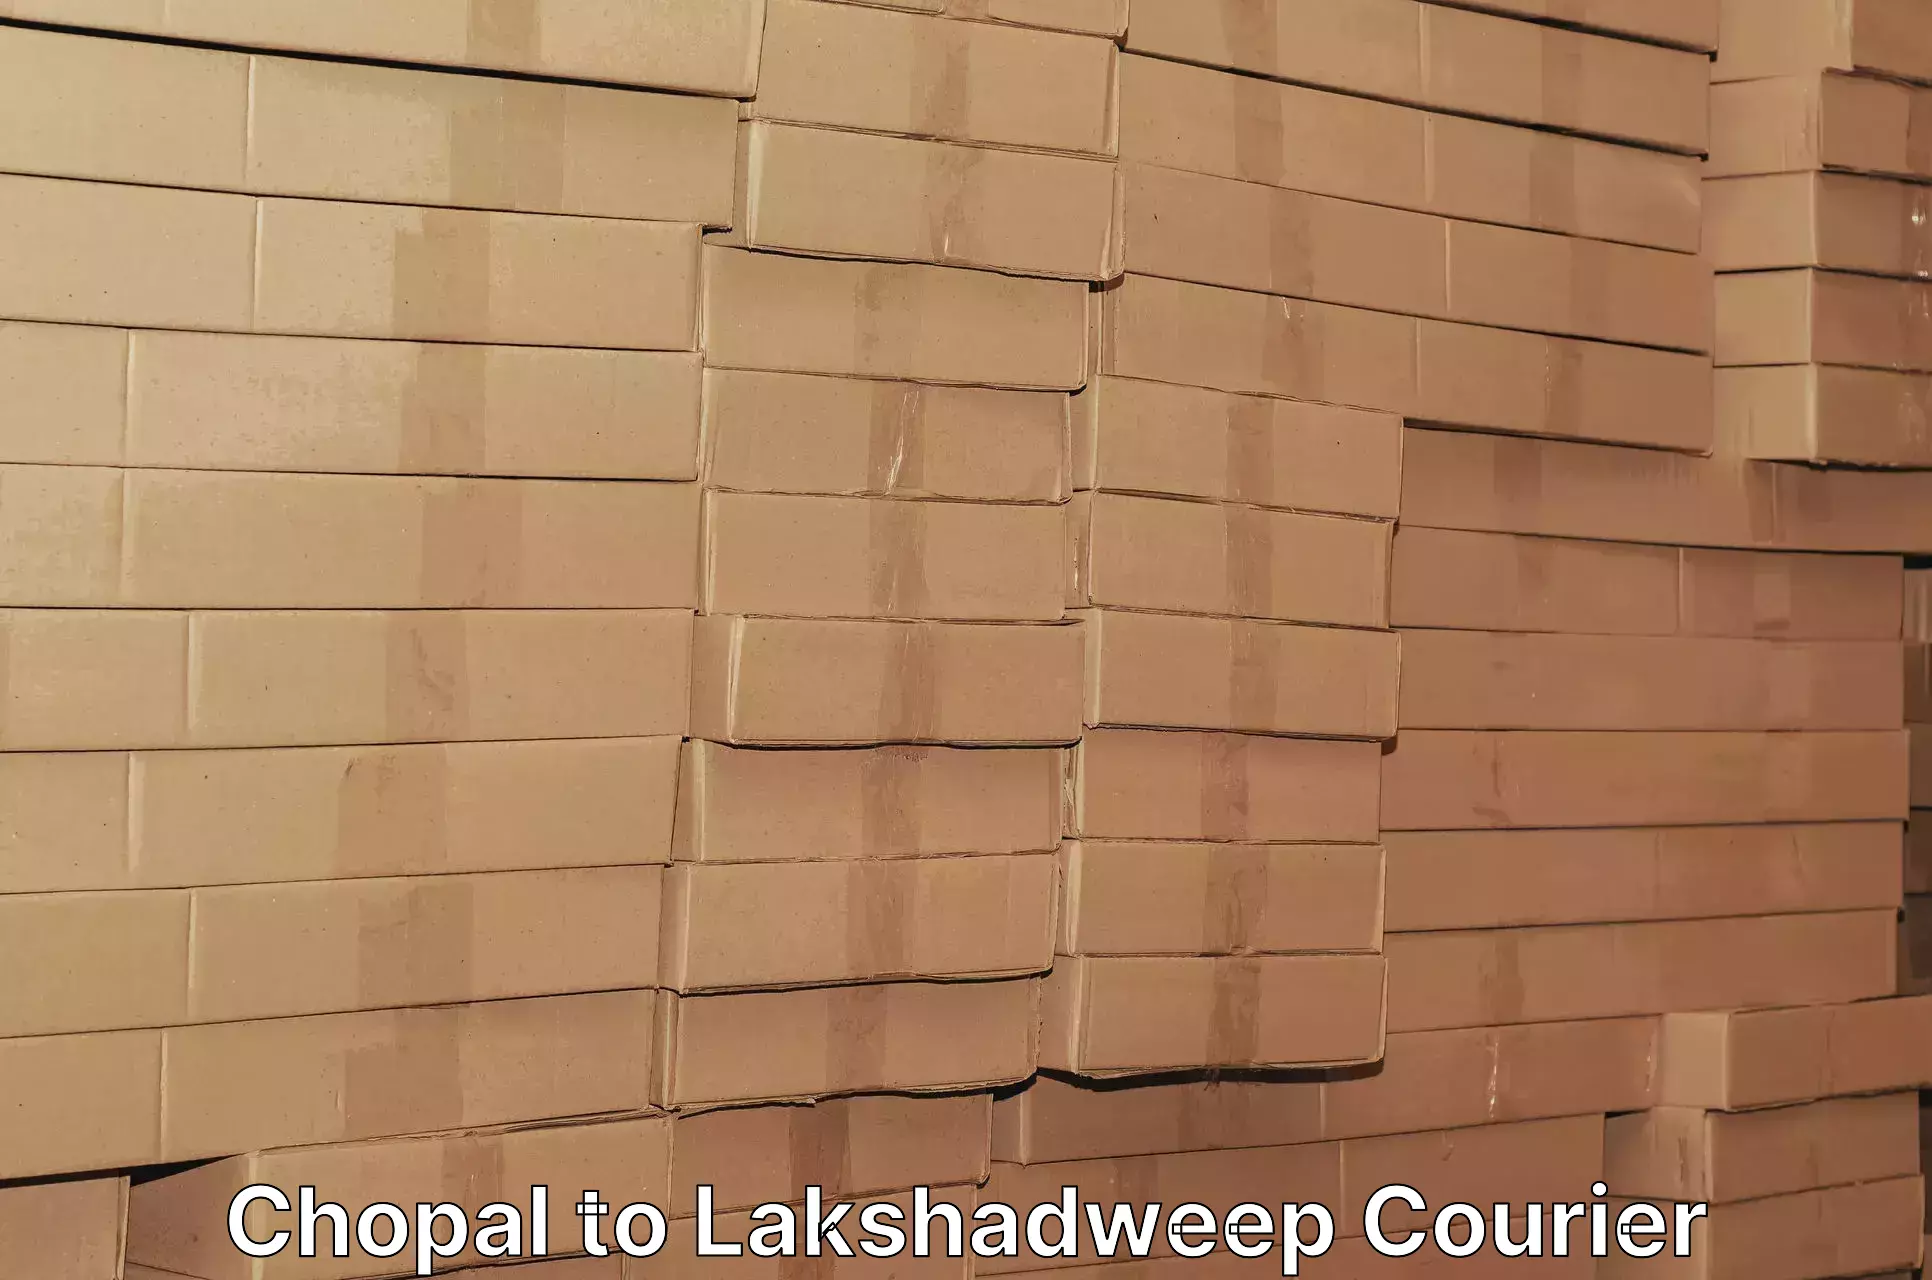 Subscription-based courier Chopal to Lakshadweep